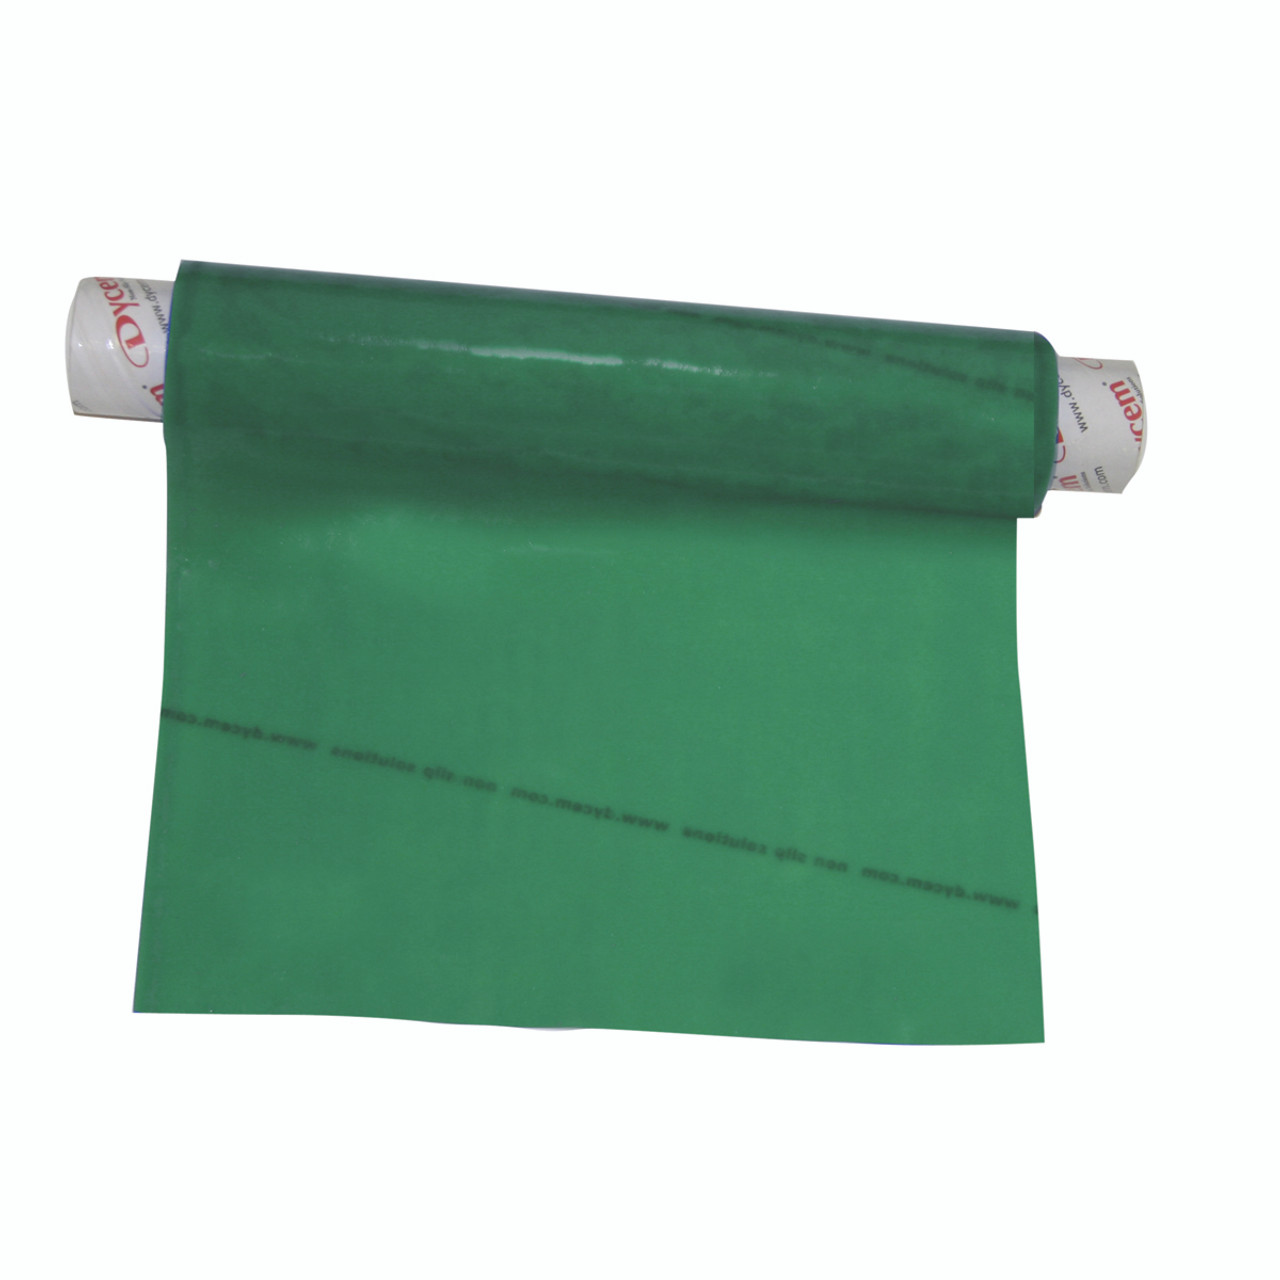 Dycem¨ non-slip material, roll, 8"x3-1/4 foot, forest green